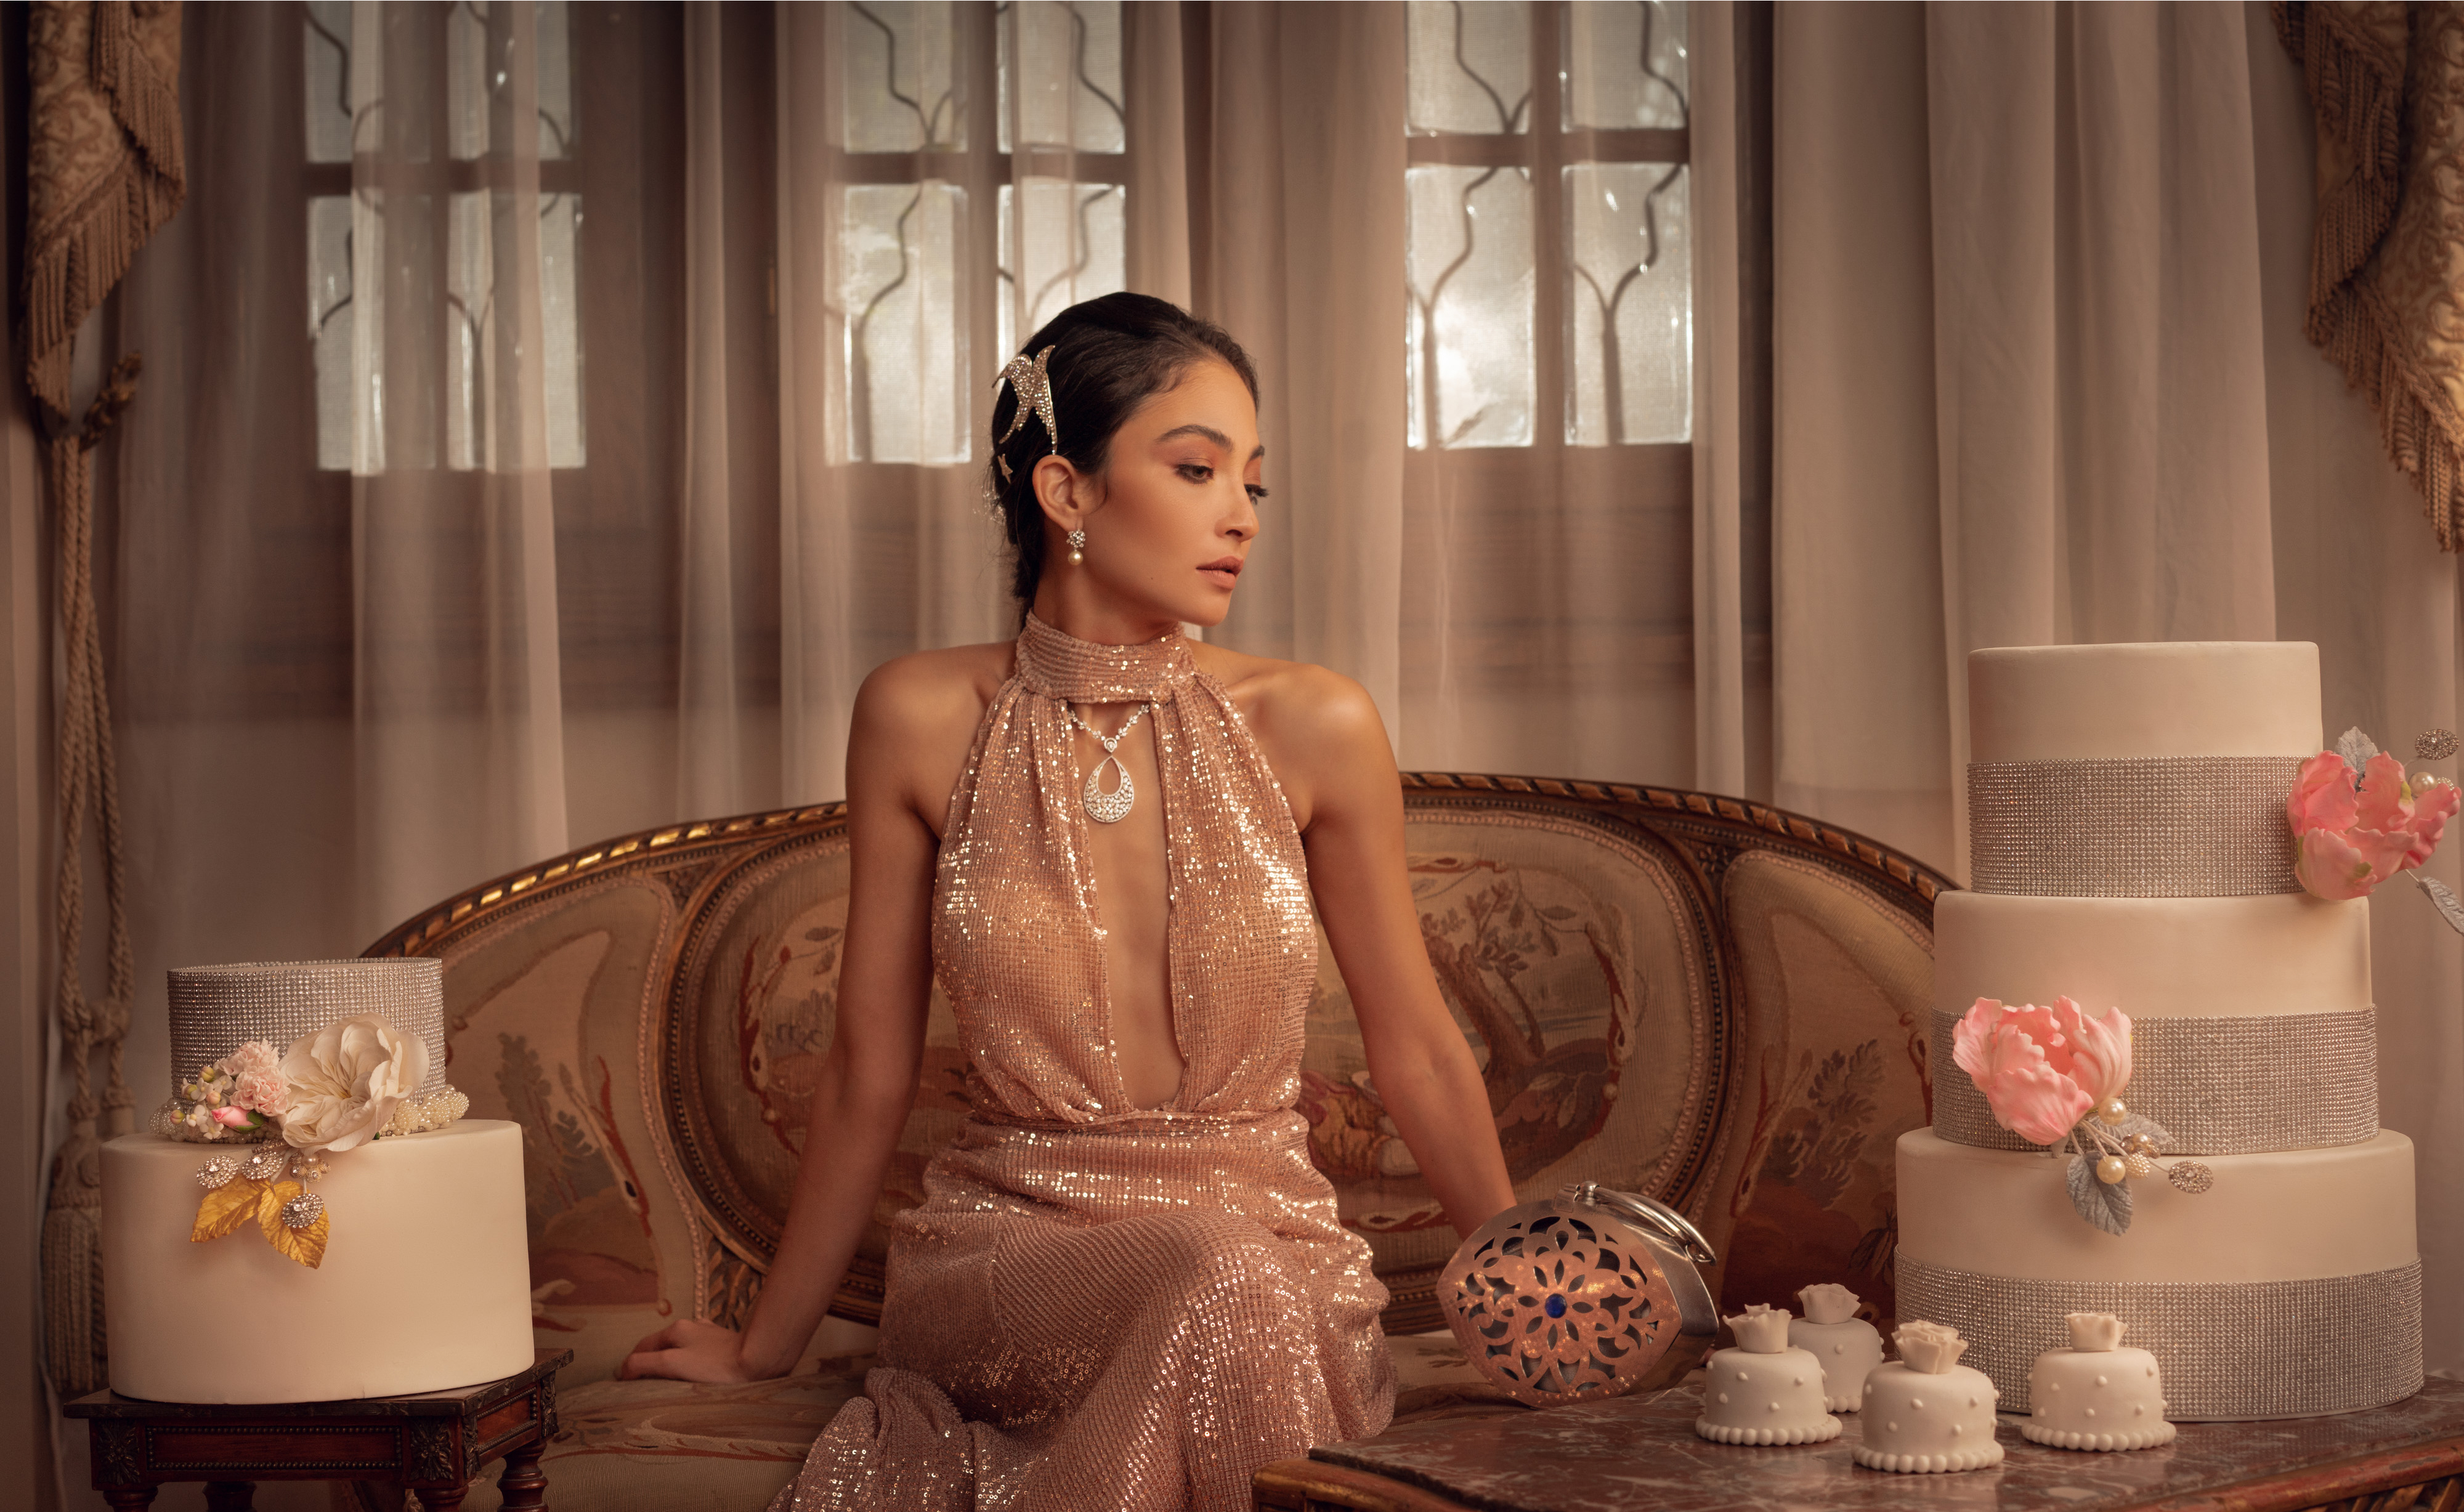 Cake Meets Fashion in This Deliciously Gorgeous New Egyptian Photoshoot